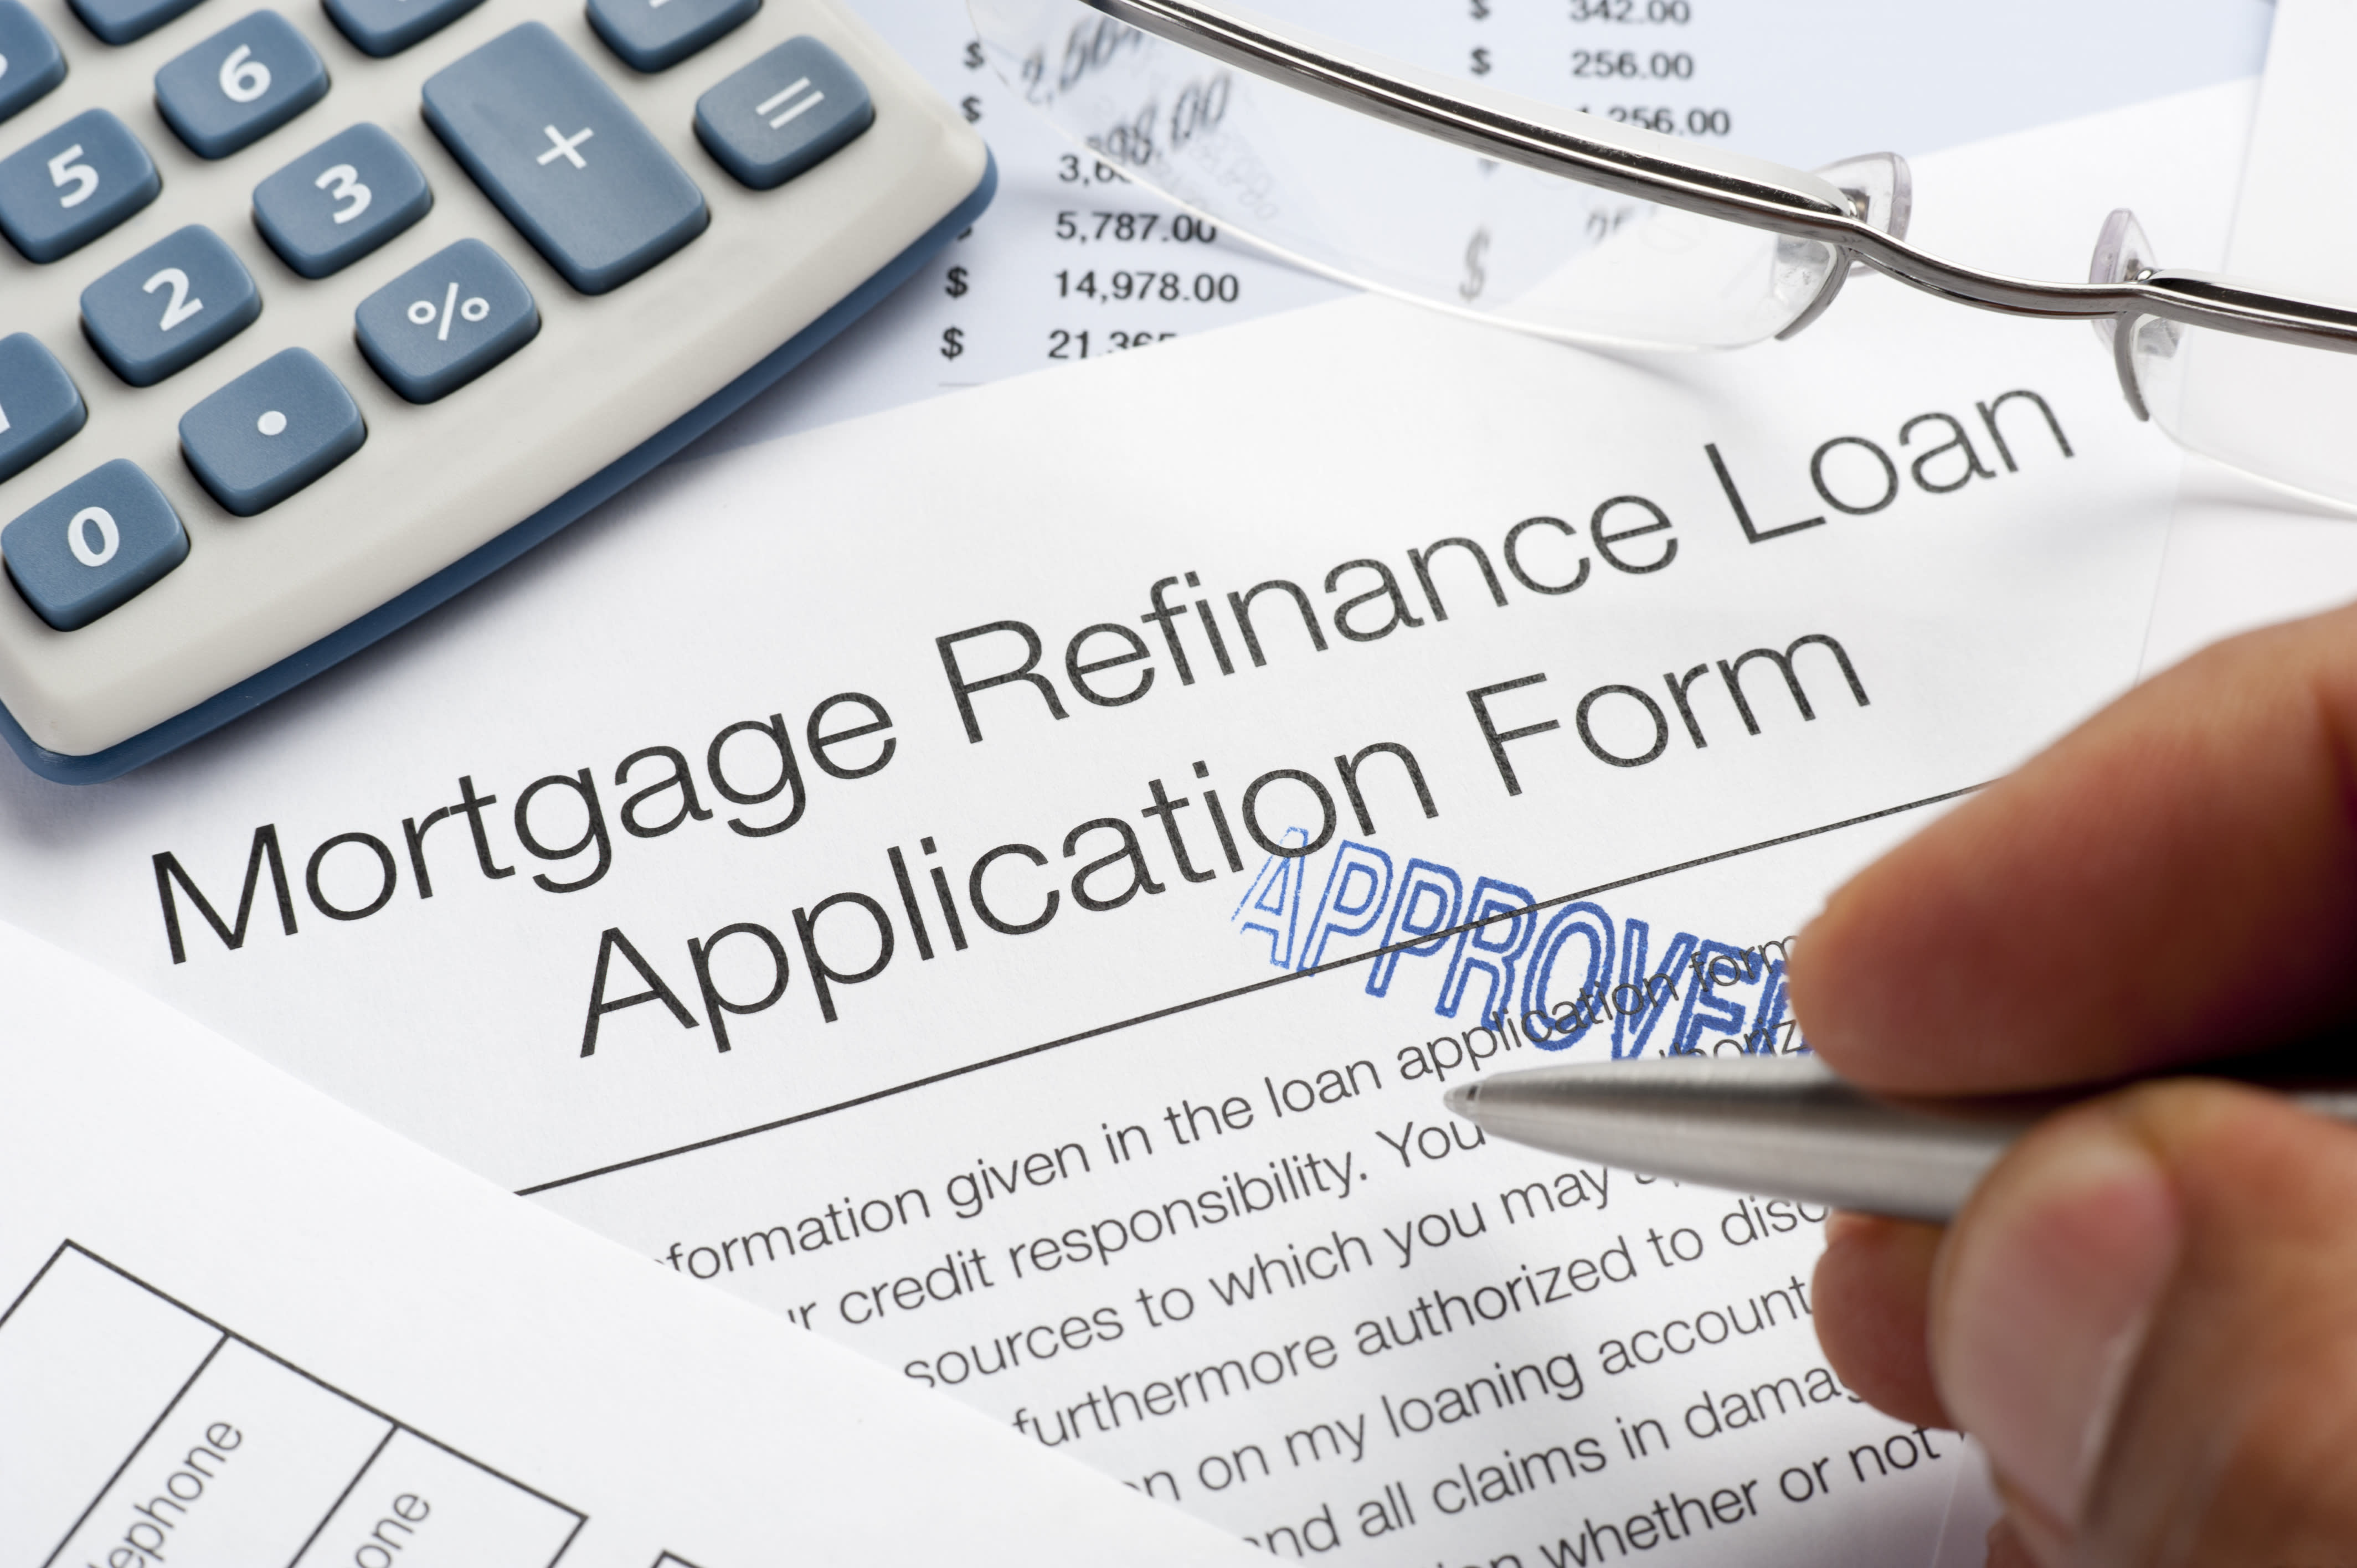 Here are mortgage refinancing options, even for those with bad credit